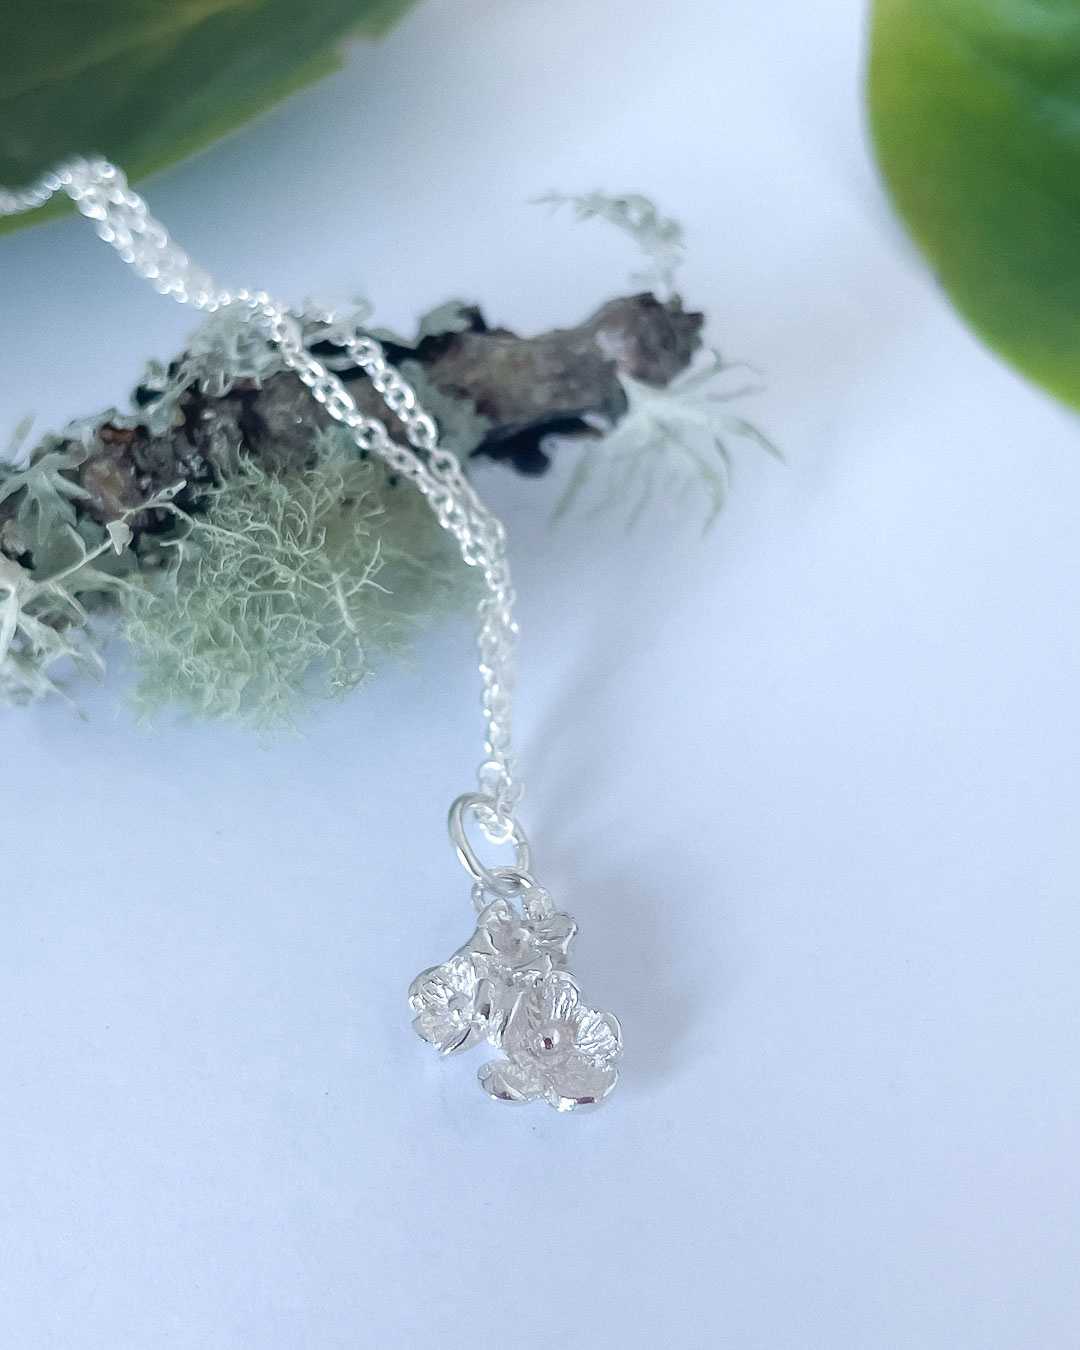 An image of the  Dainty Flower Bouquet of three sterling silver flowers and the Sterling Silver Chain draped over a mossy twig and between green leaves